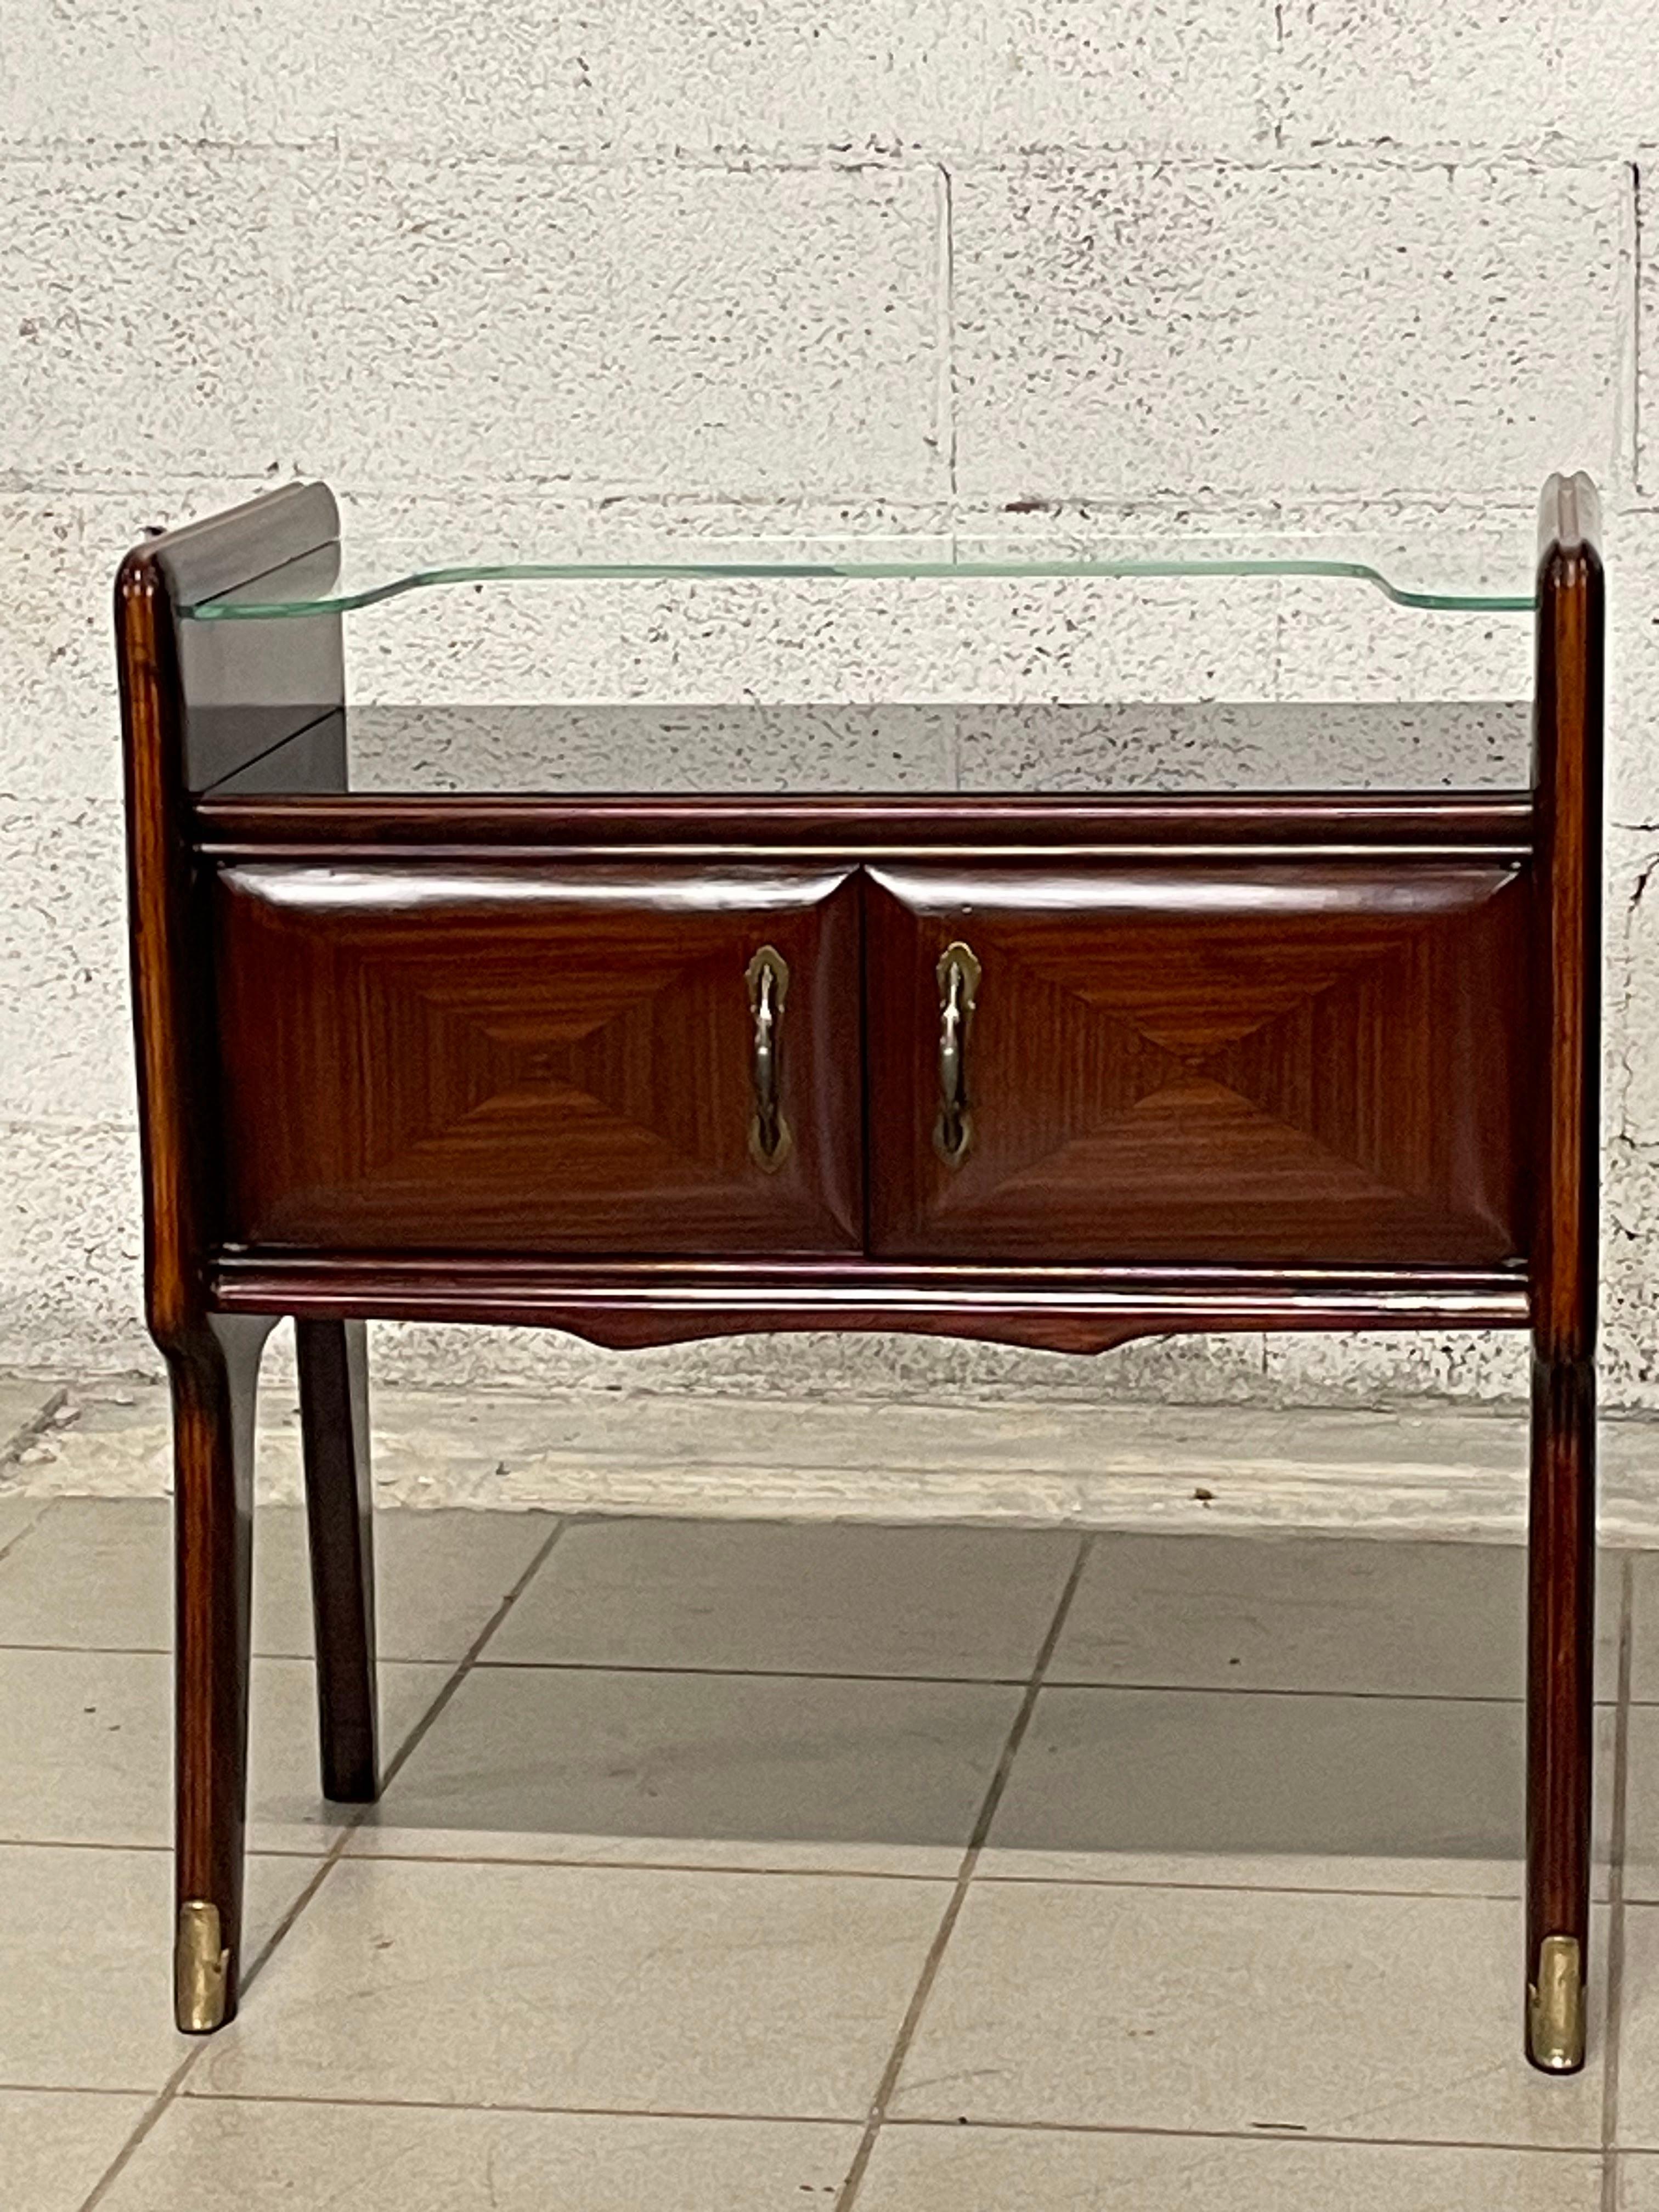 Pair of elegant nightstands from the 1950s fully restored.

Mahogany wood frame with black glass top and clear glass shaped shelf.

Brass details lend elegance and style to this pair of nightstands.
